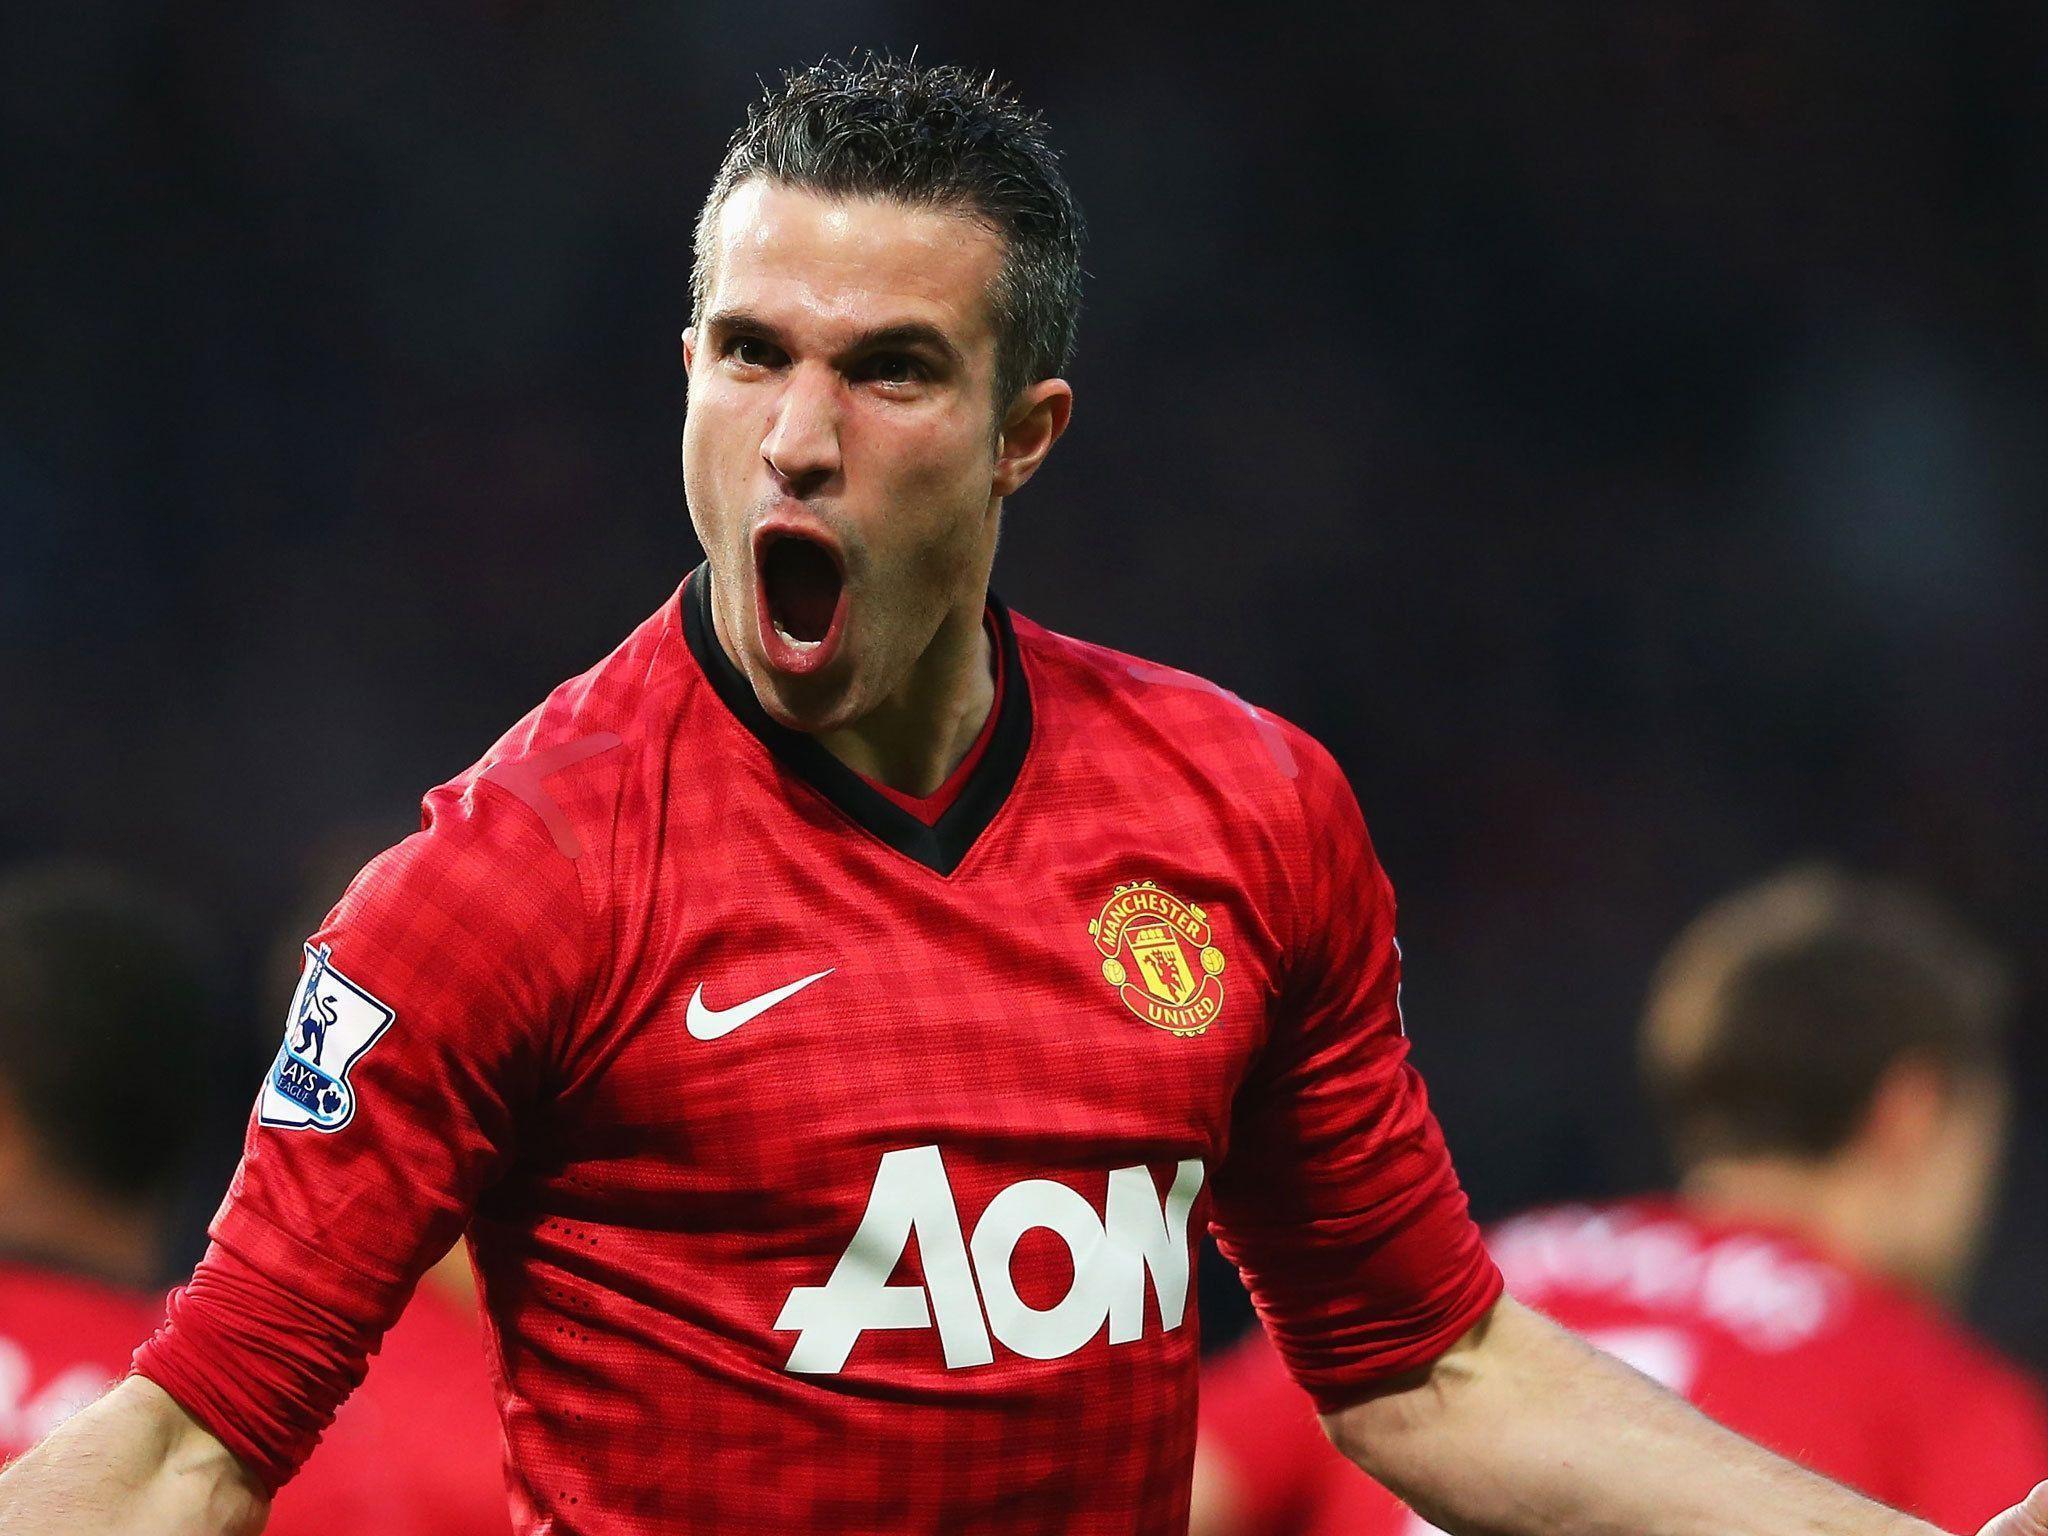 The attacker number 20 of Manchester United Robin van Persie